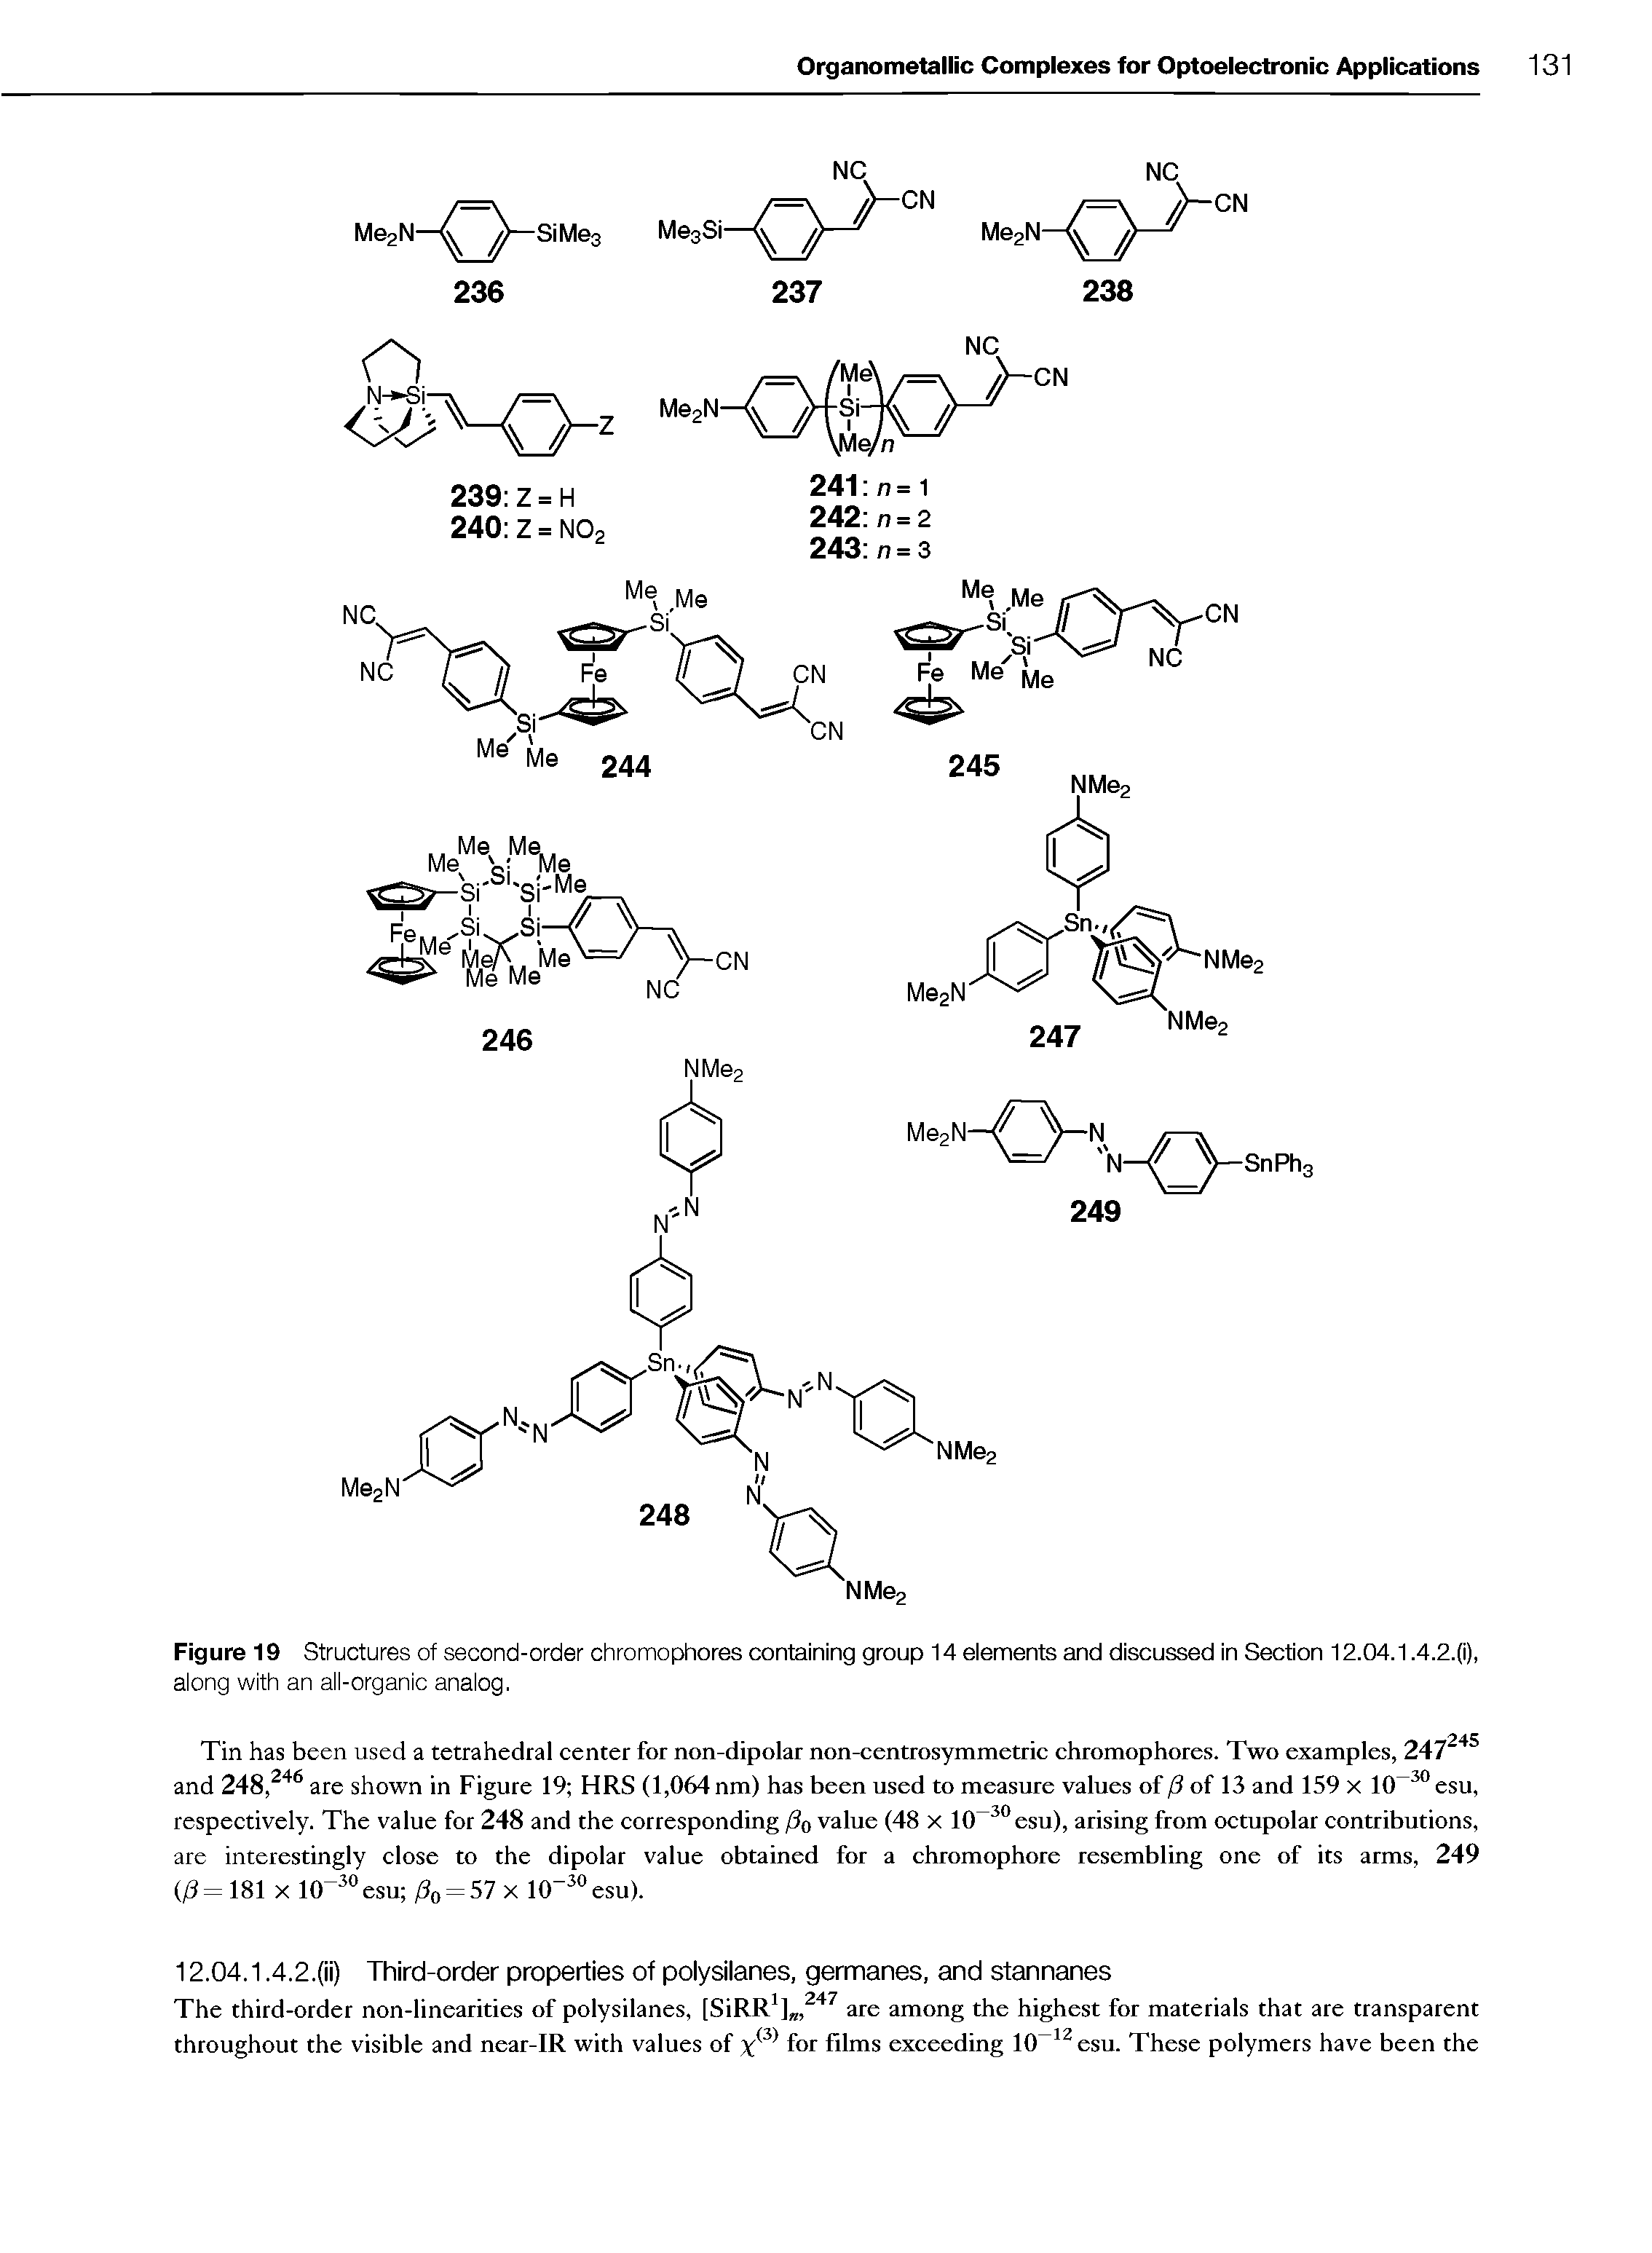 Figure 19 Structures of second-order chromophores containing group 14 eiements and discussed in Section 12.04.1.4.2.(i),...